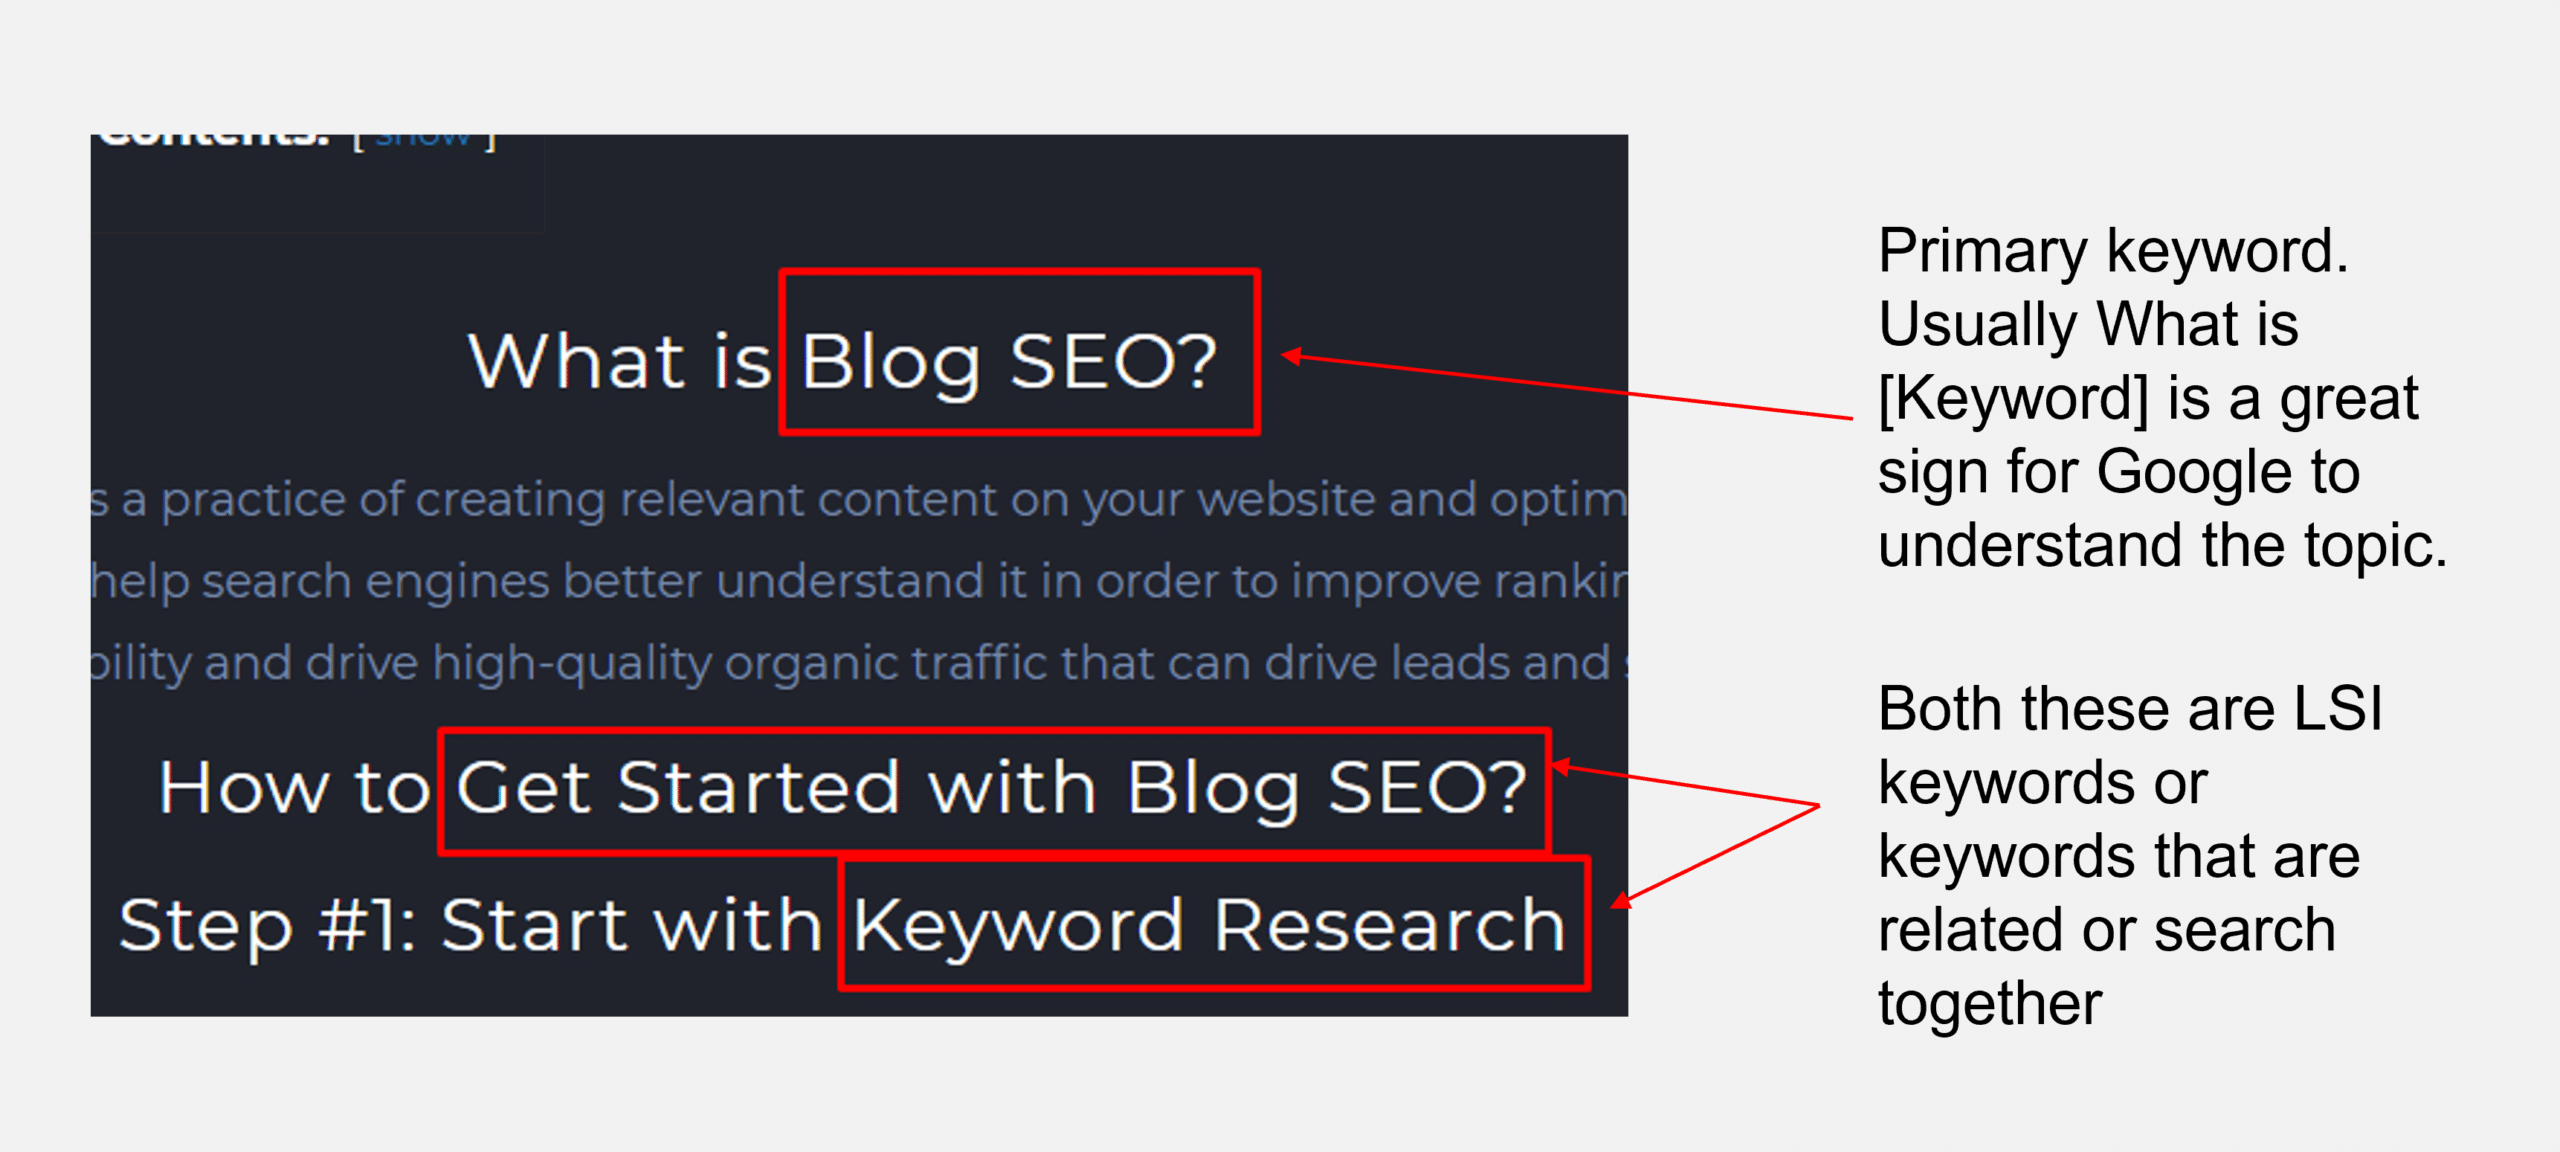 including primary keyword and lsi keywords in subheadings